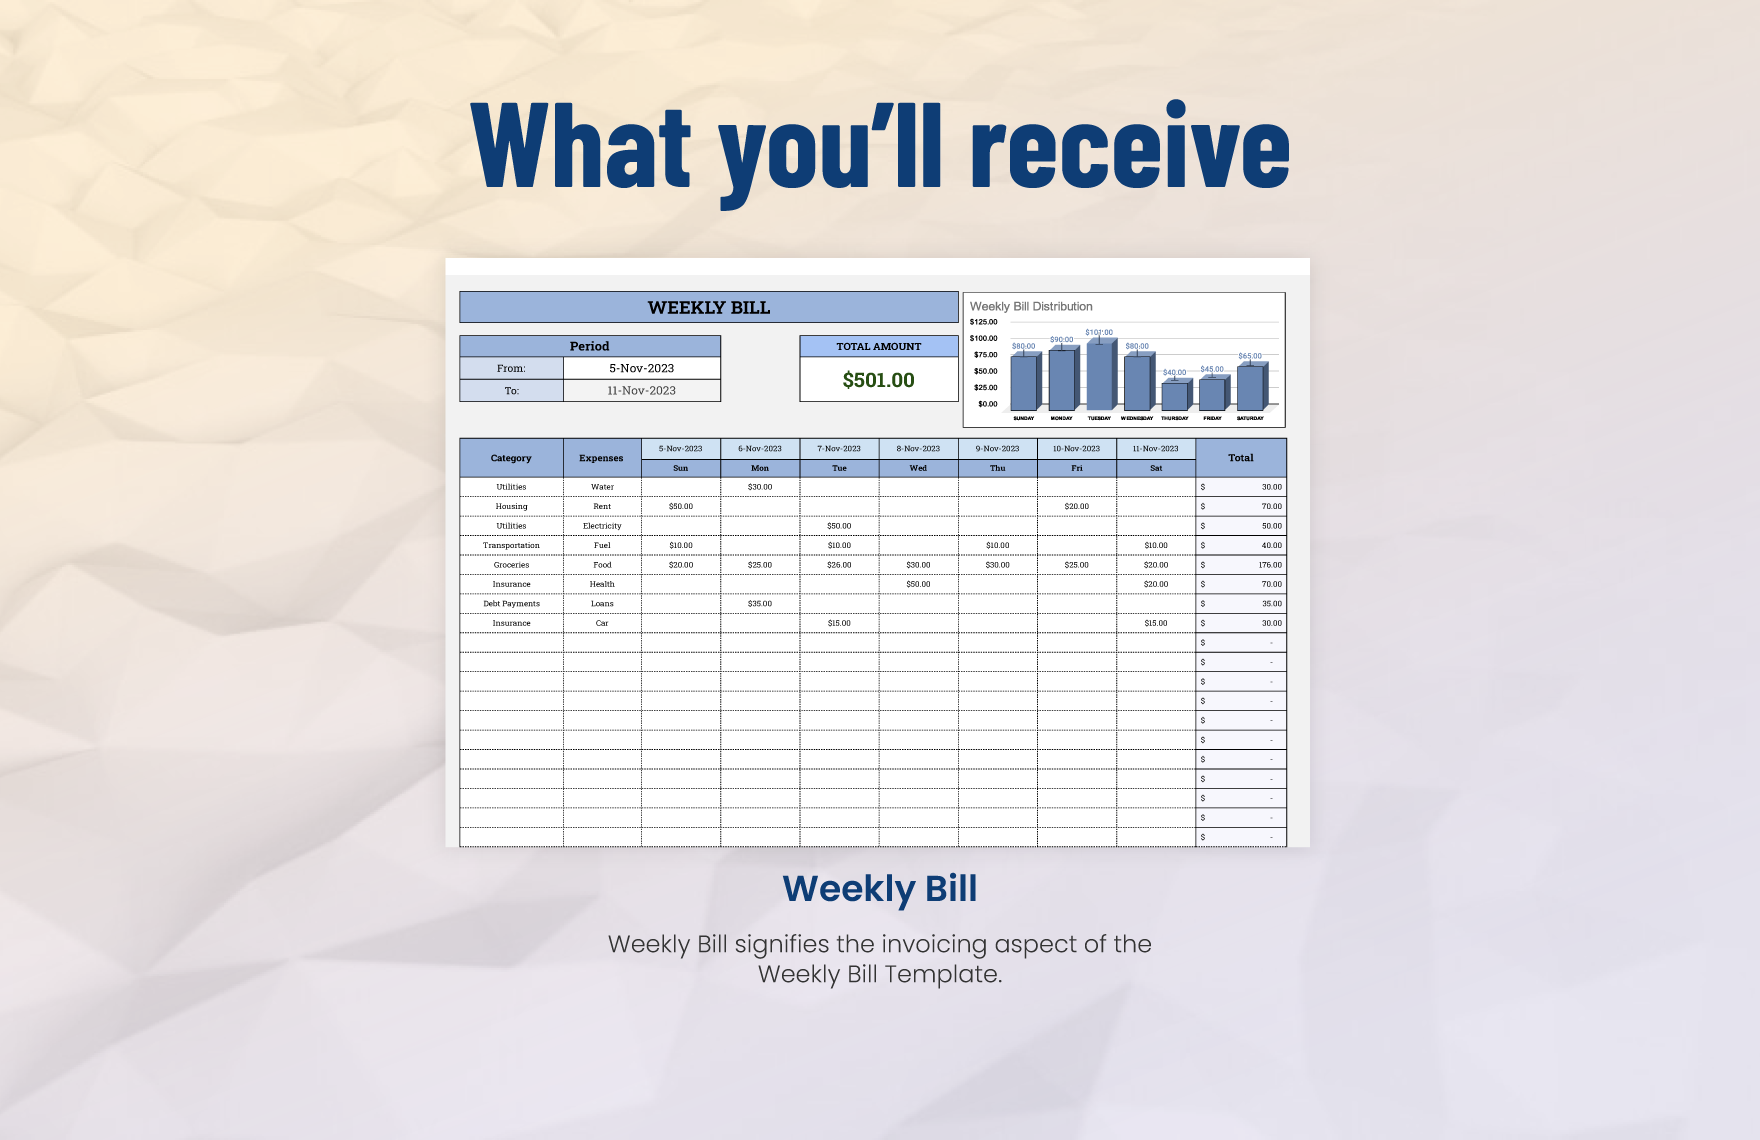 Weekly Bill Template